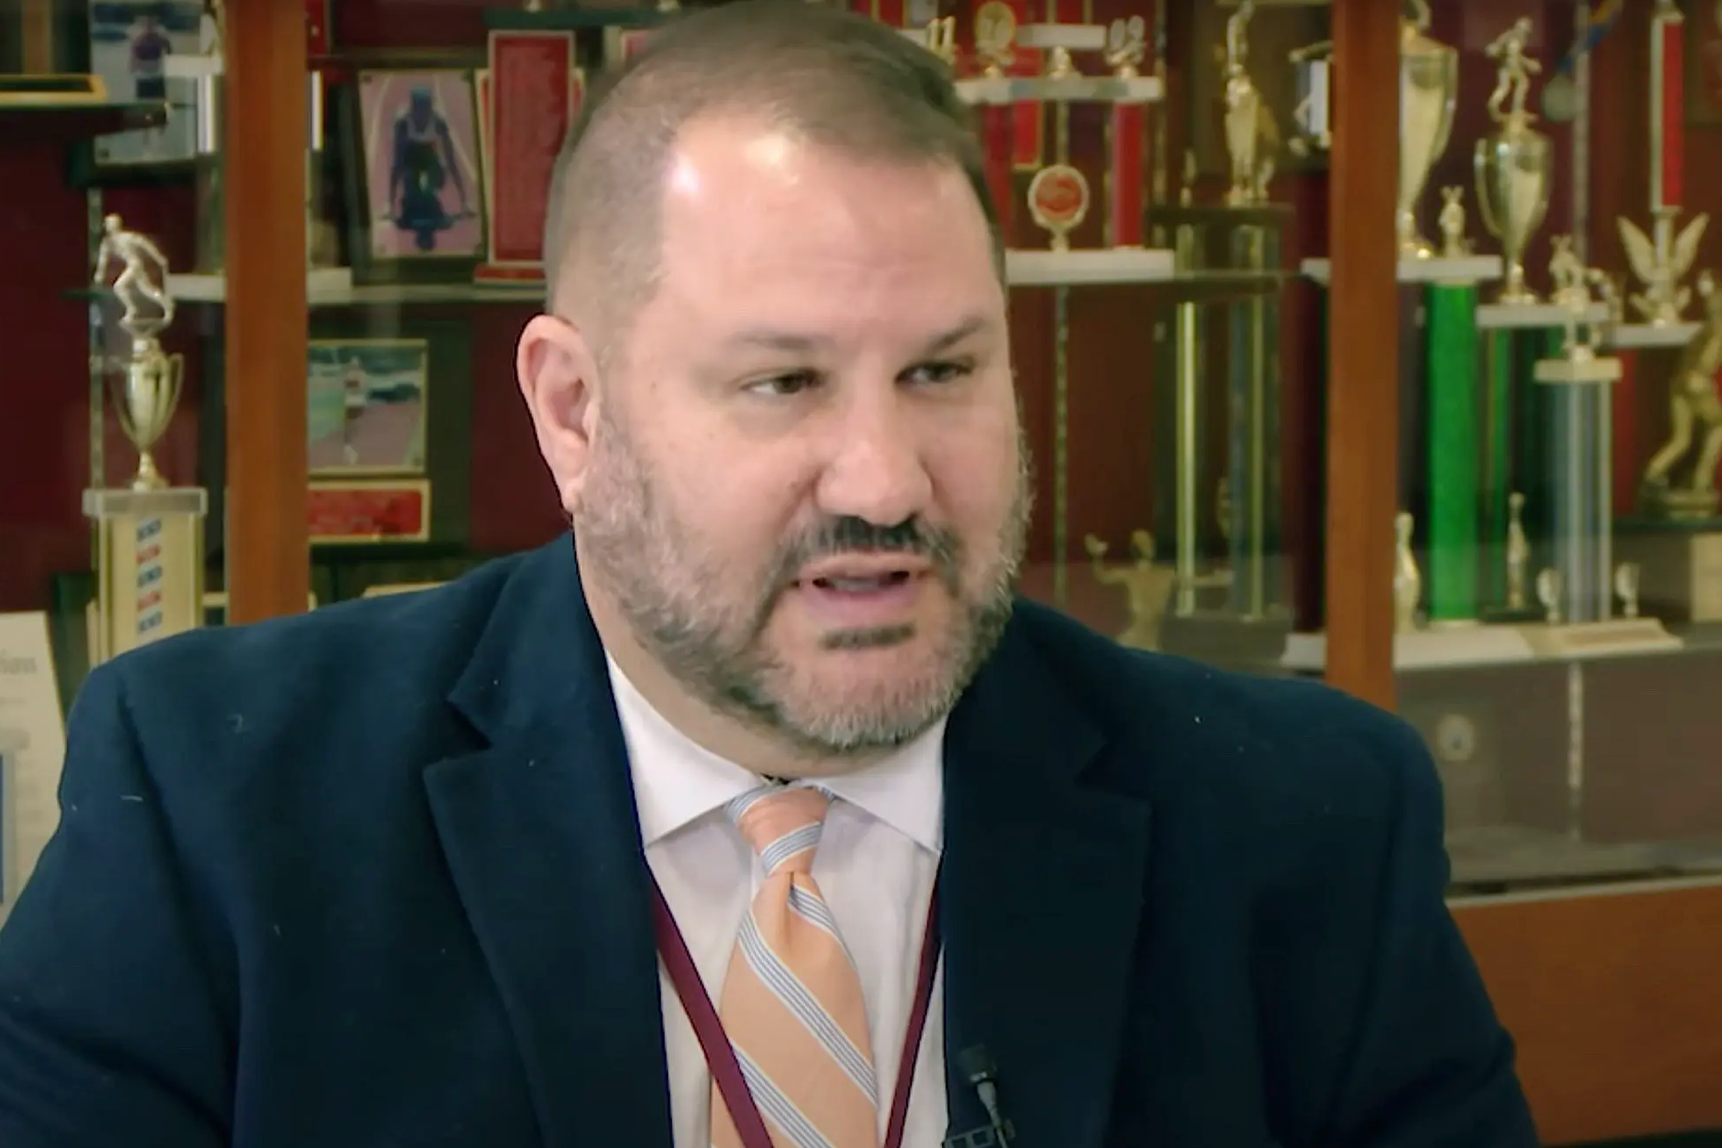 New Jersey school superintendent Triantafillos Parlapanides resigned after statements he made about Adriana Kuch and her family